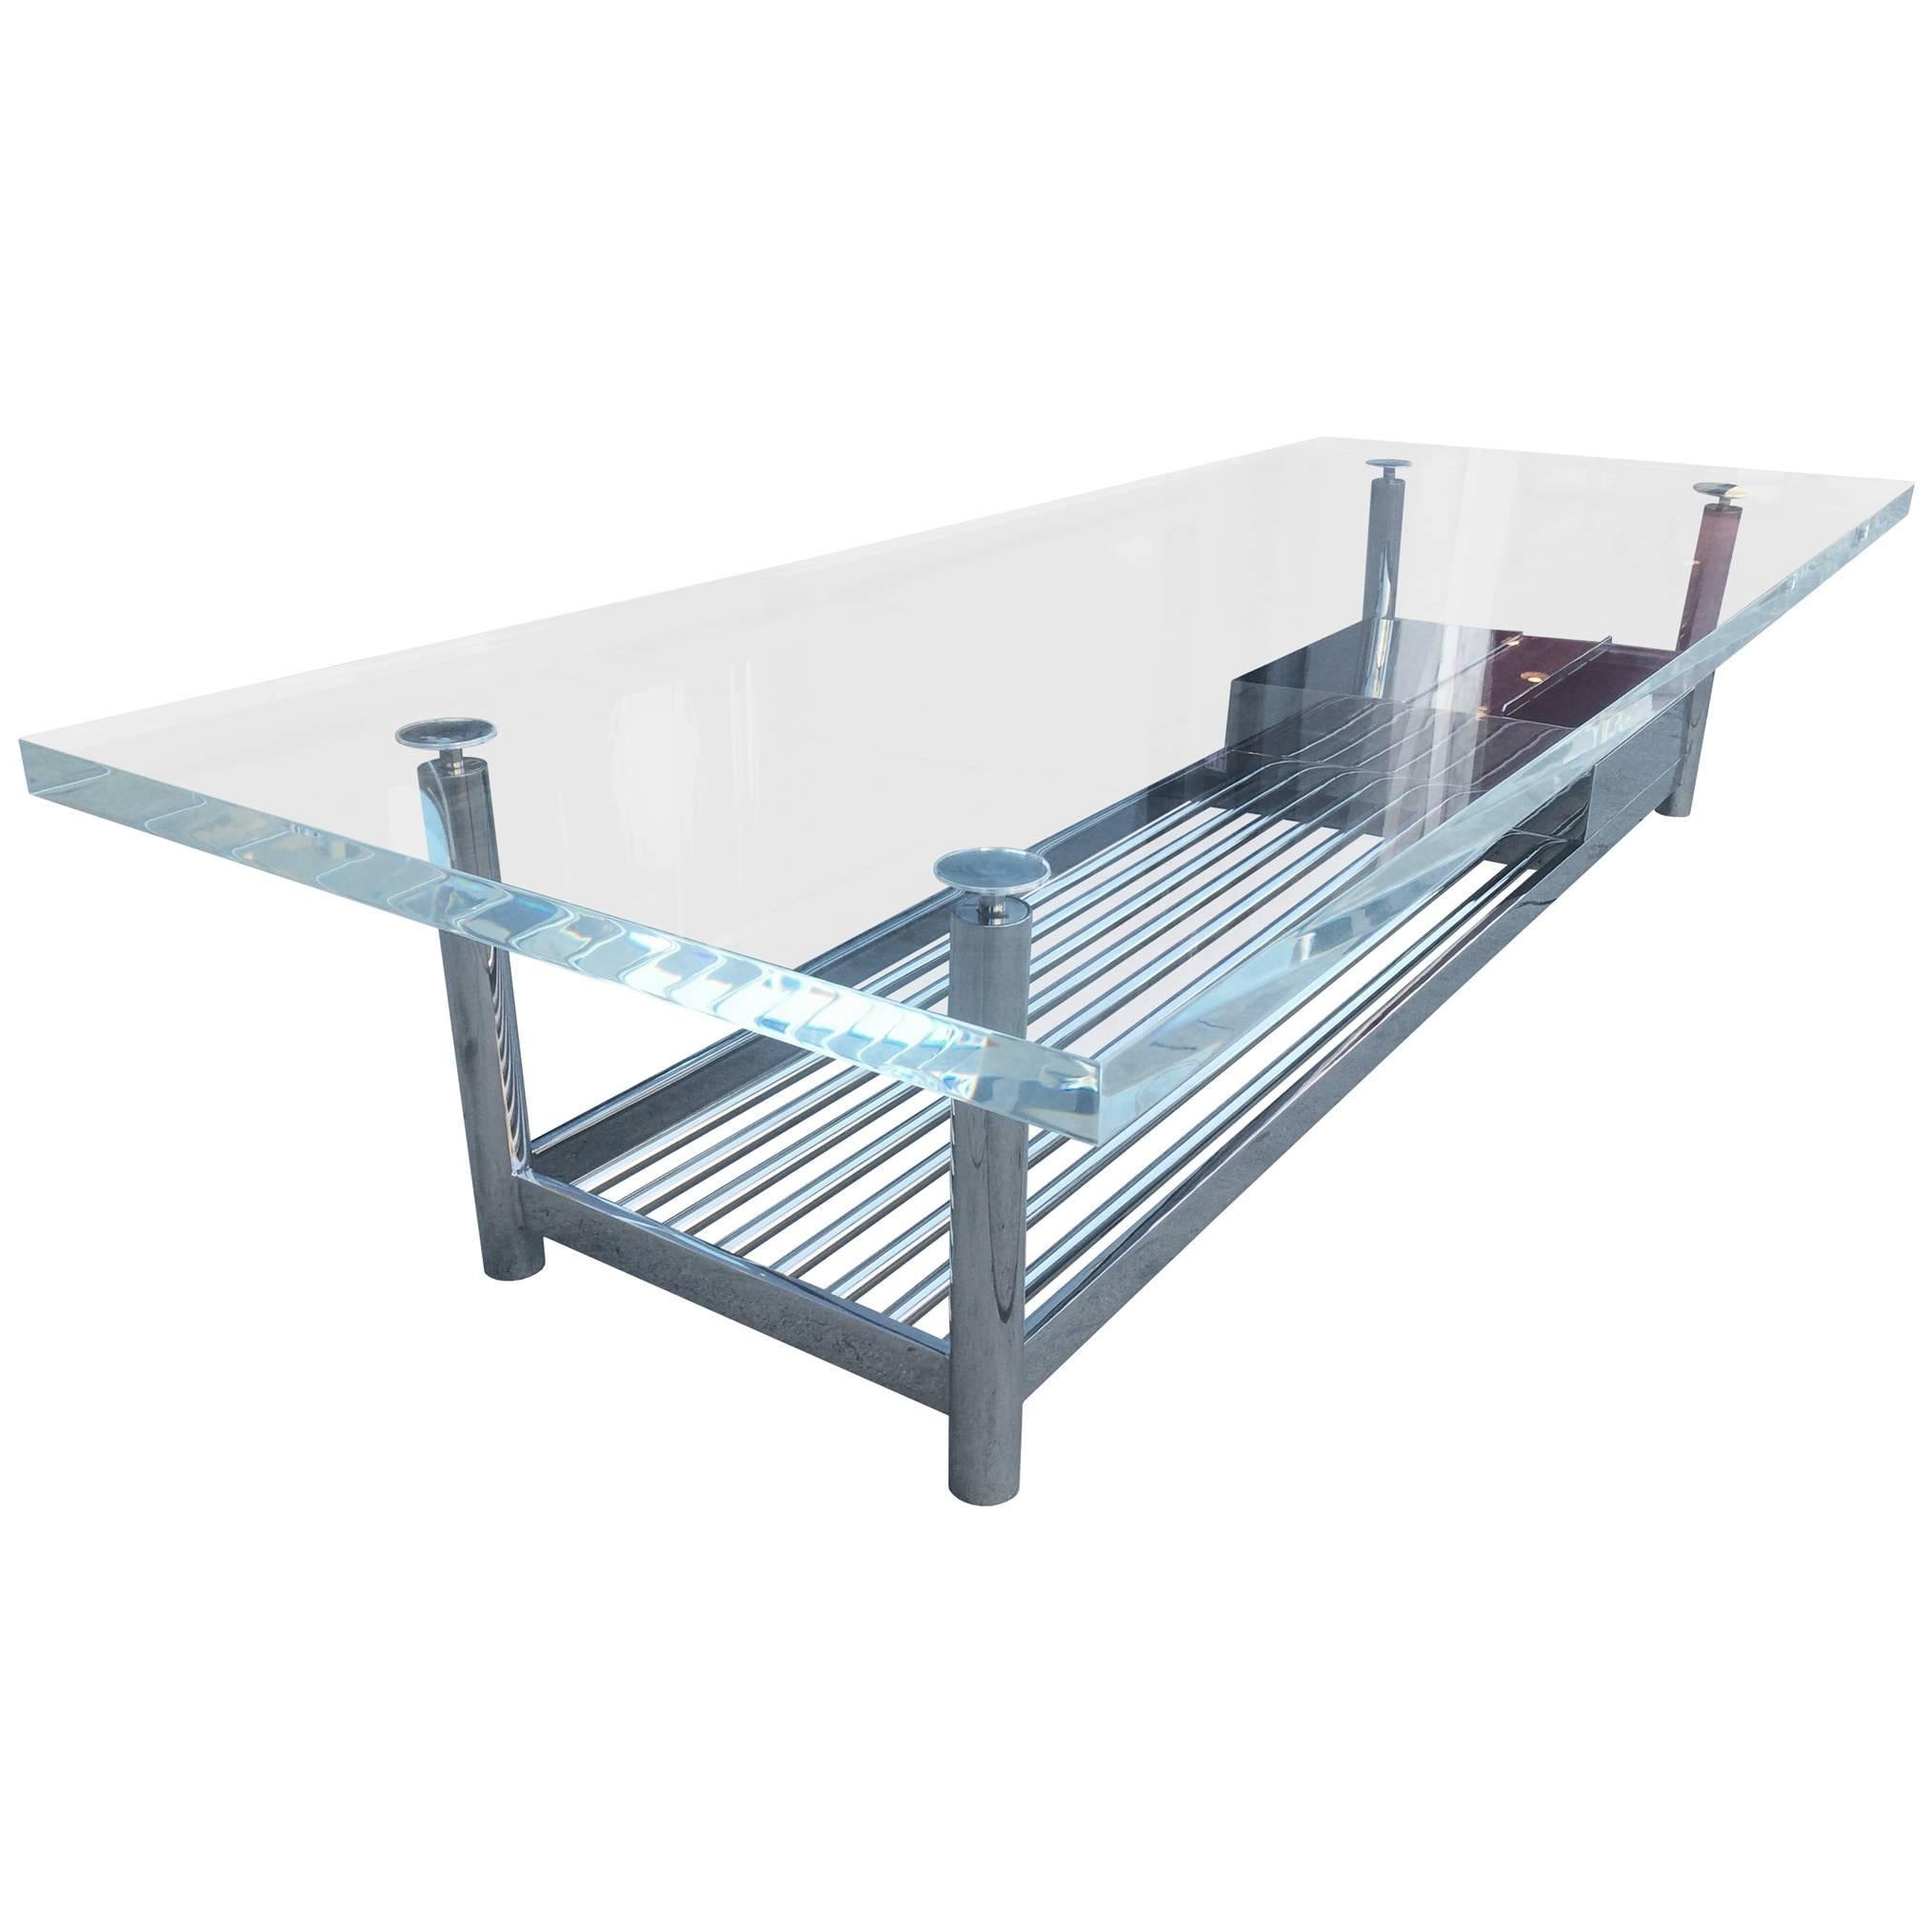 Limited Edition "Marion" Coffee Table in Stainless Steel and Lucite by J. Blake